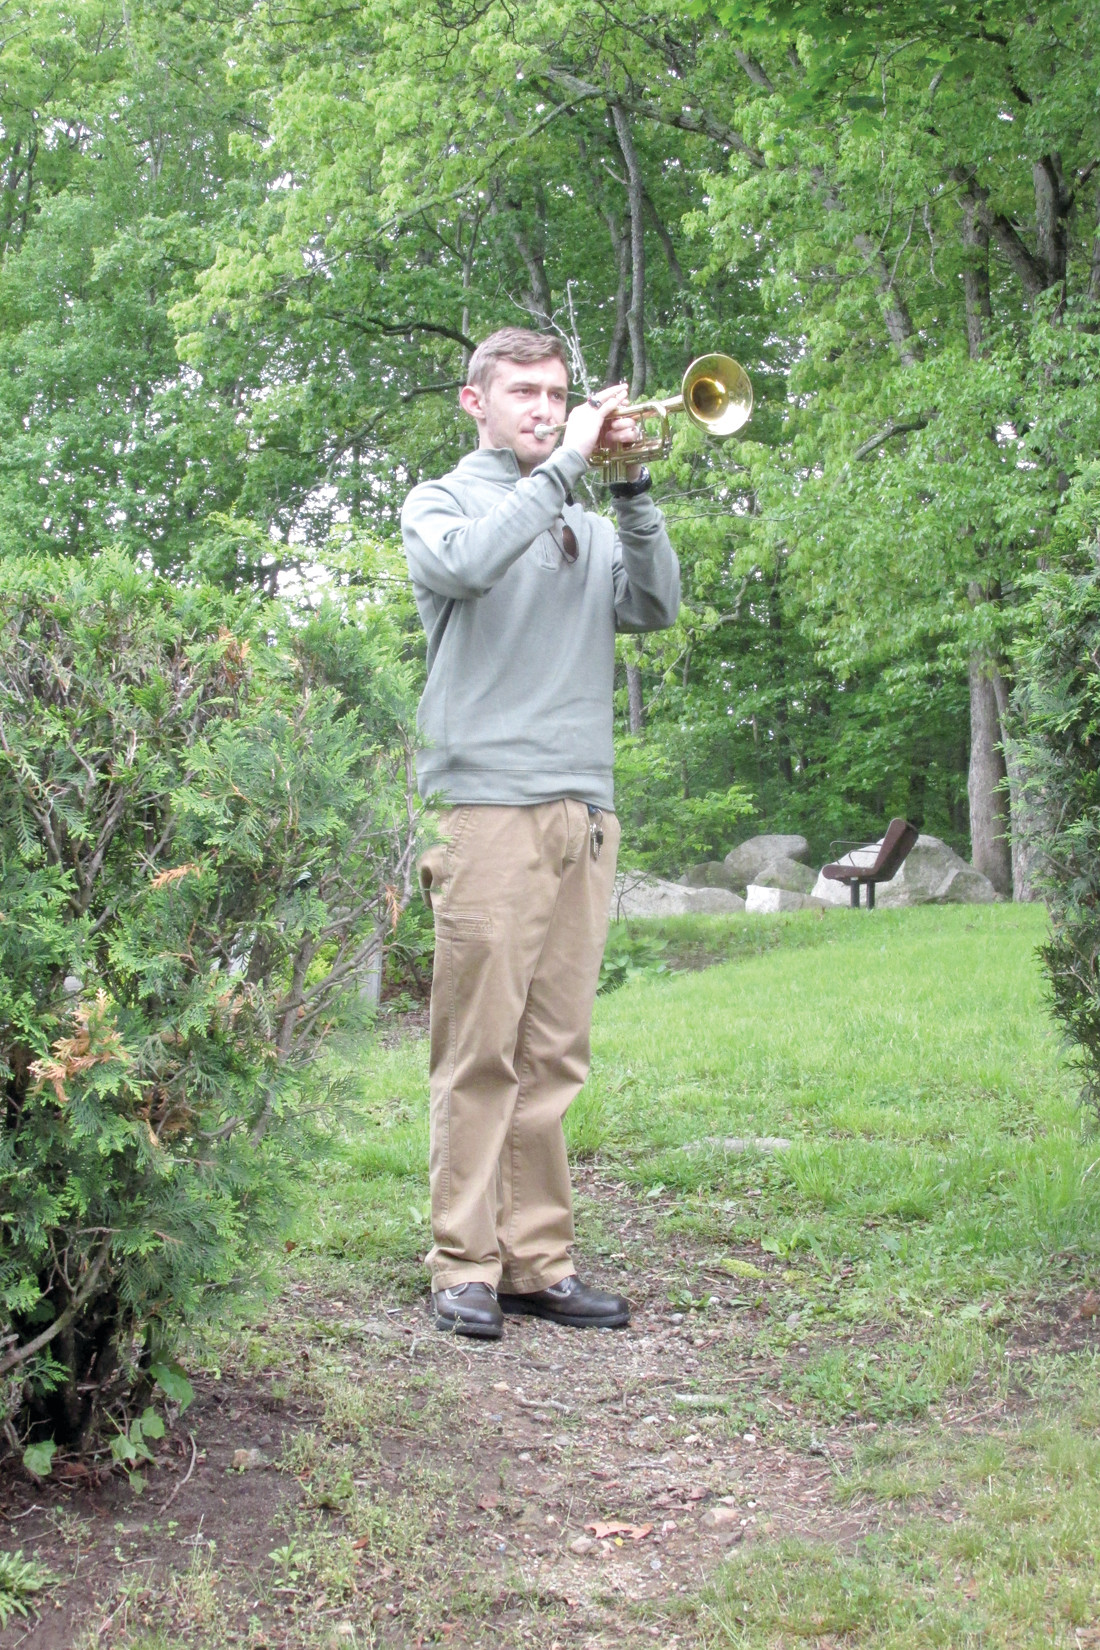 PROUD PANTHER: Edward DiLorenzo, a member of Johnston High School’s award-winning band, had the honor of playing Taps through his trumpet that officially closed Saturday’s annual Memorial Weekend Service.